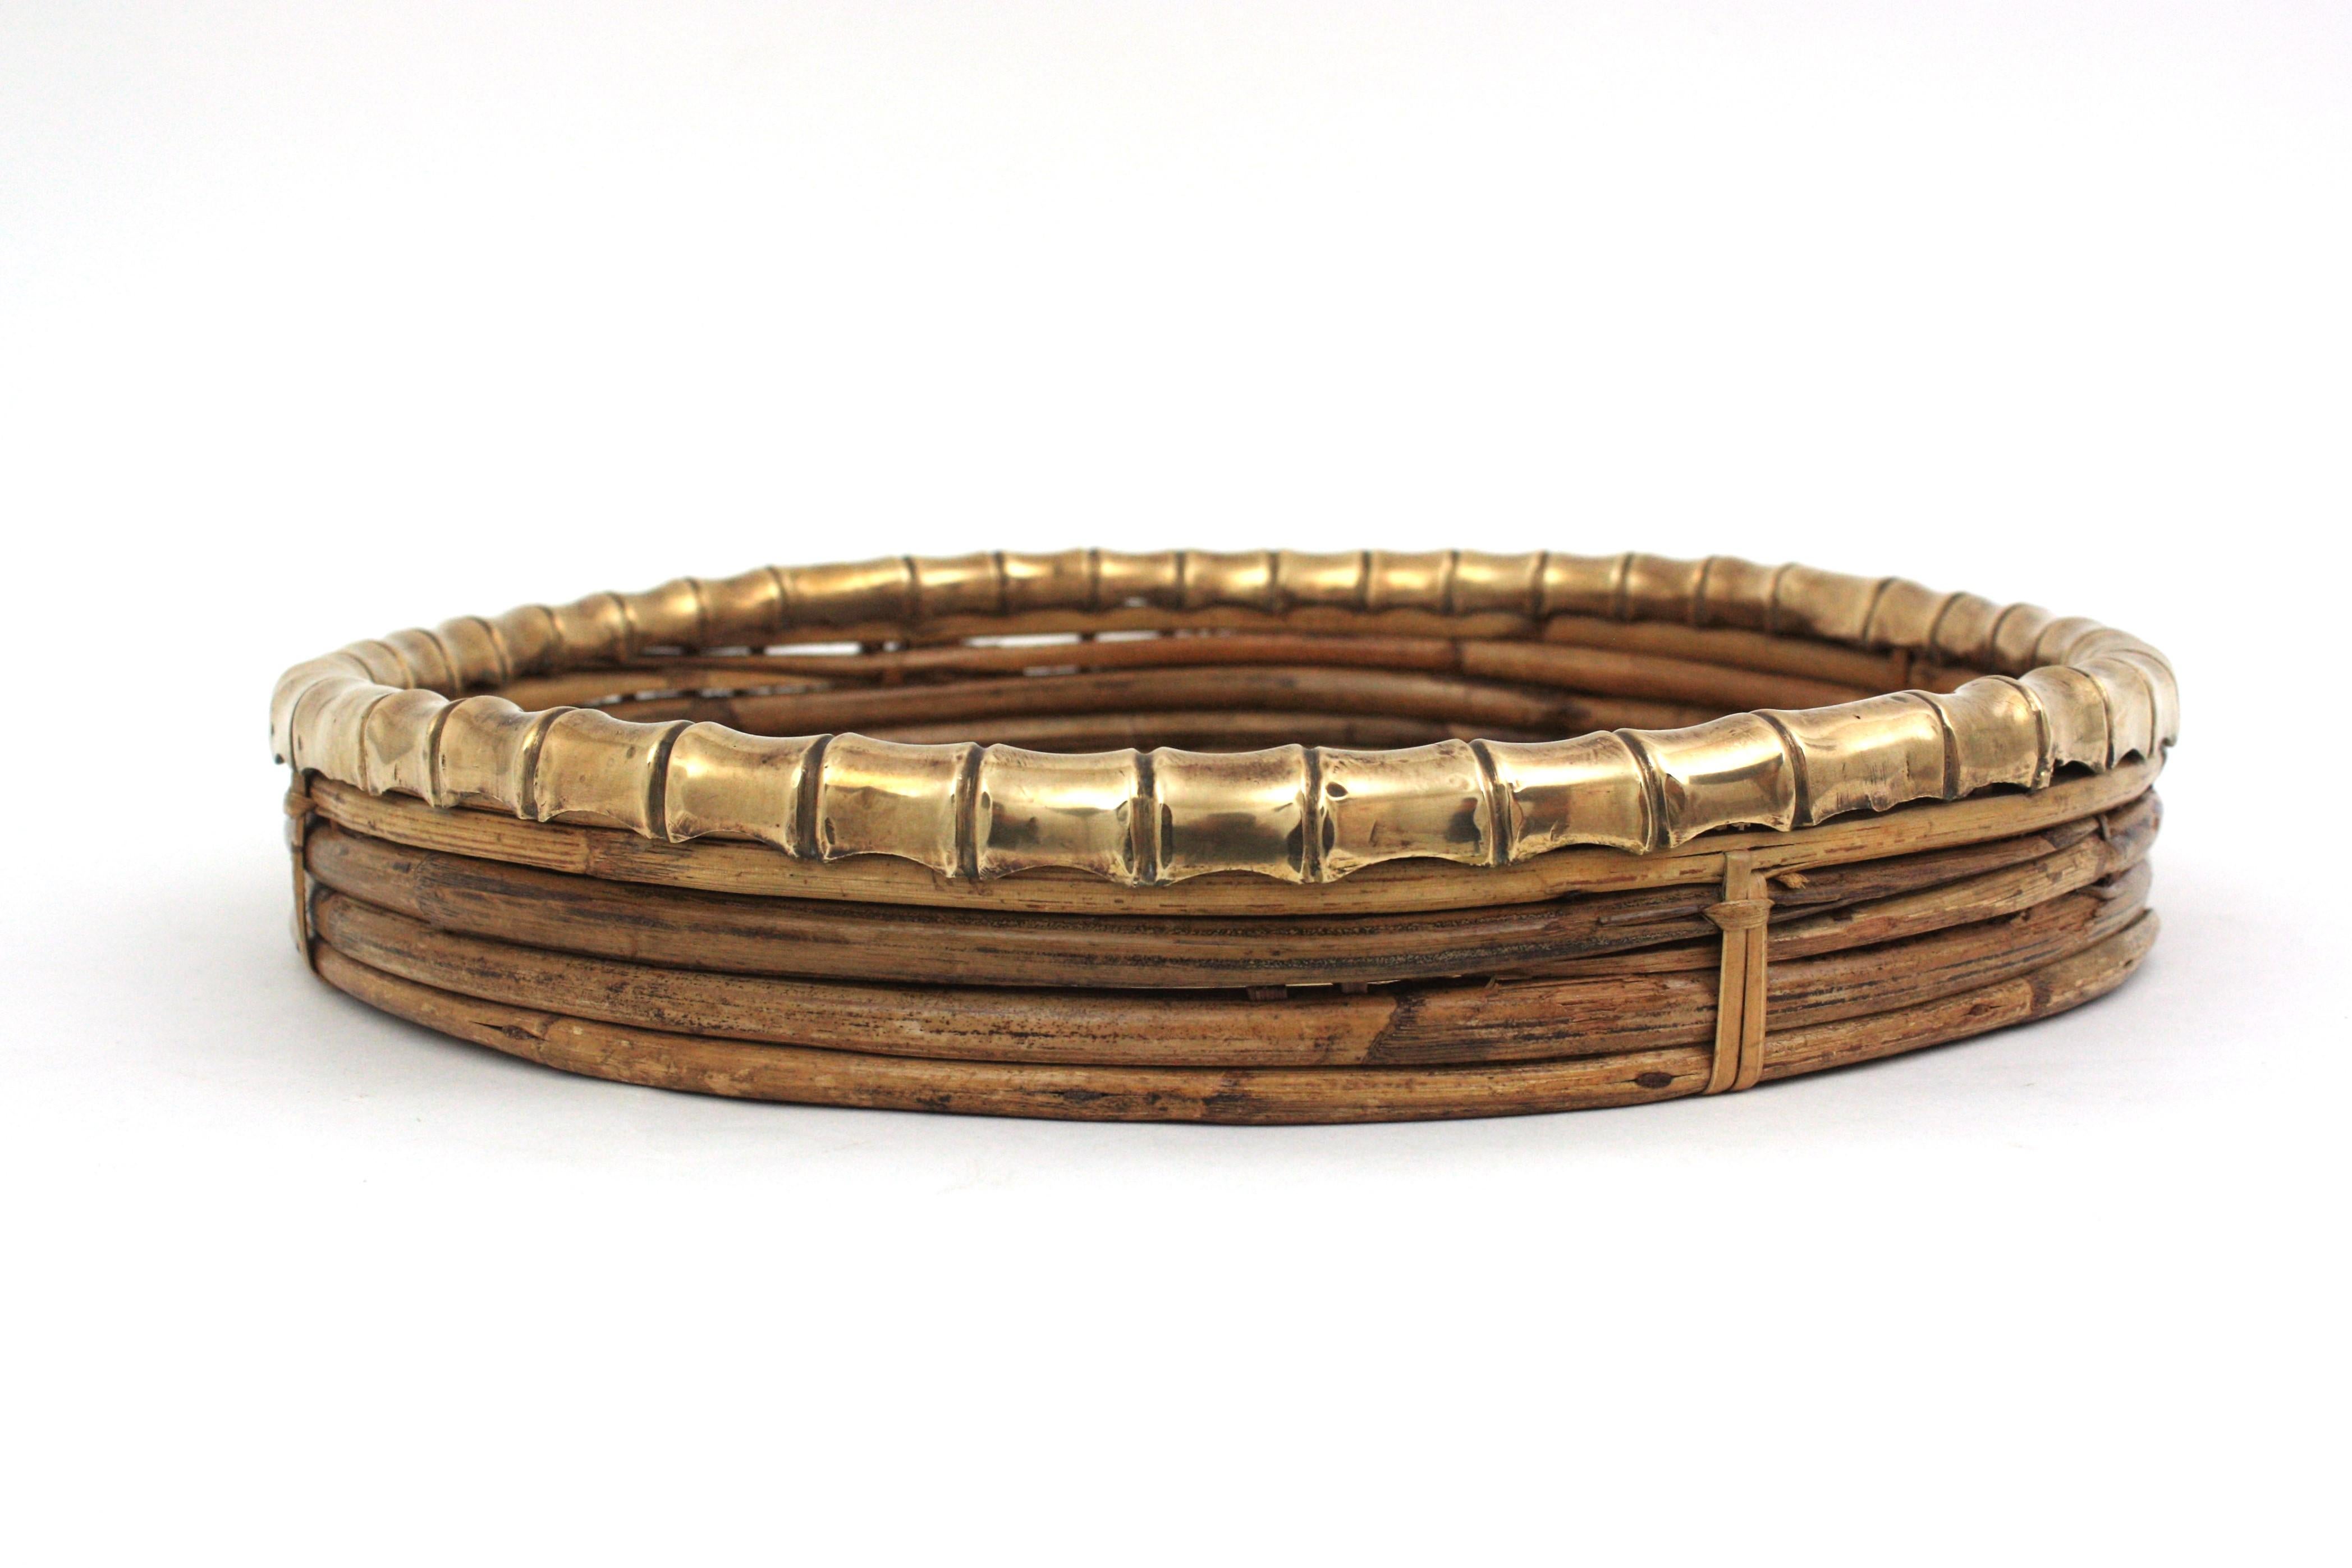 Rattan and Brass Round Centerpiece with Faux Bamboo Rim, Italy, 1970s For Sale 6